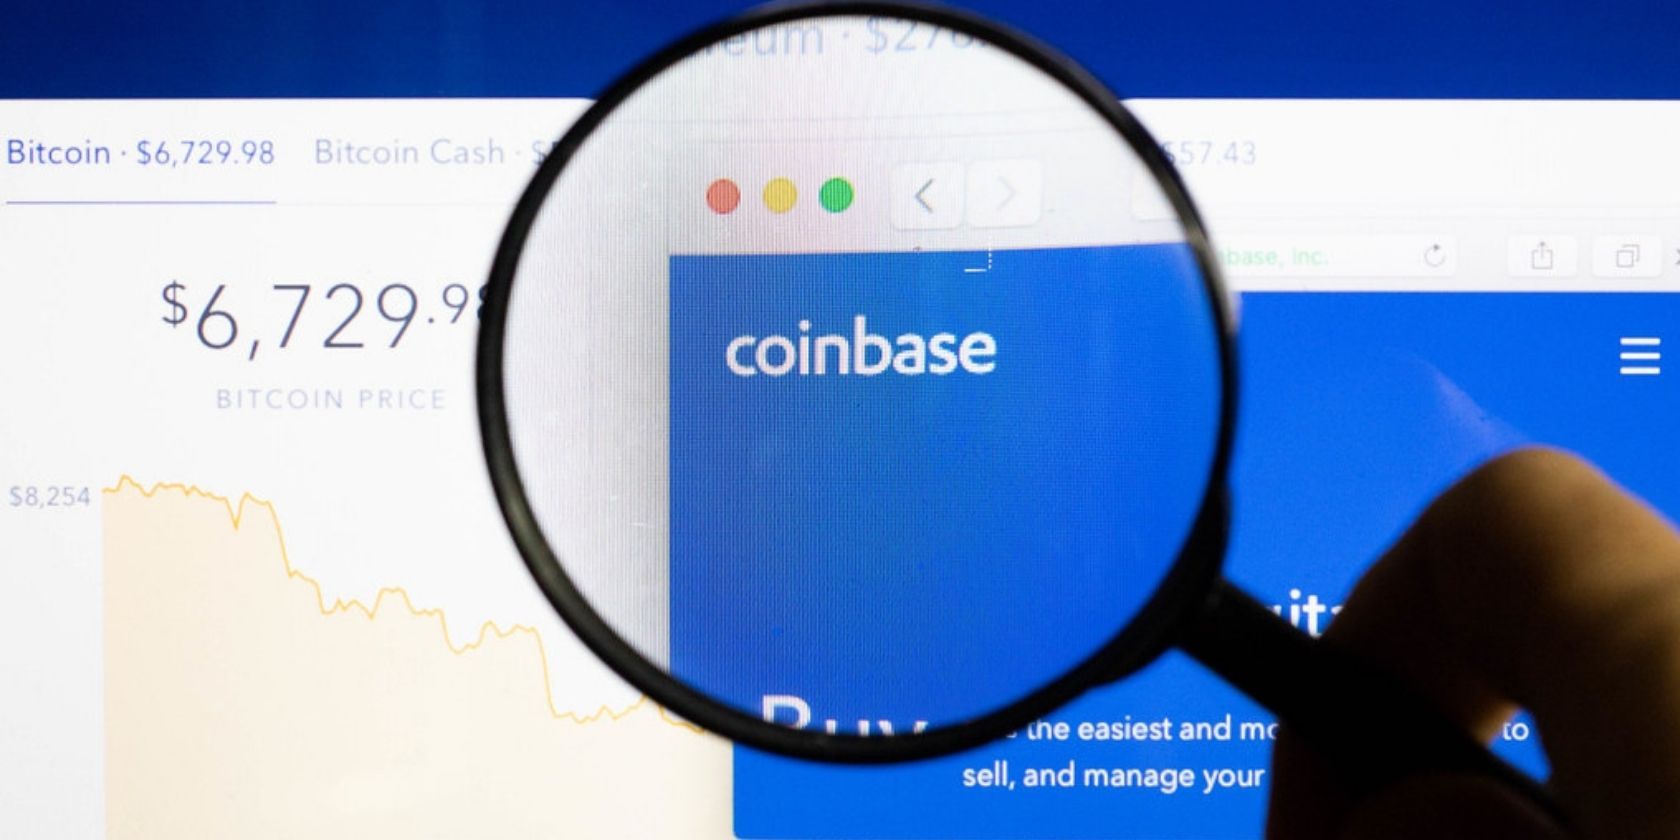 Is Coinbase a Scam? No, But You May Find It Hard to Trust